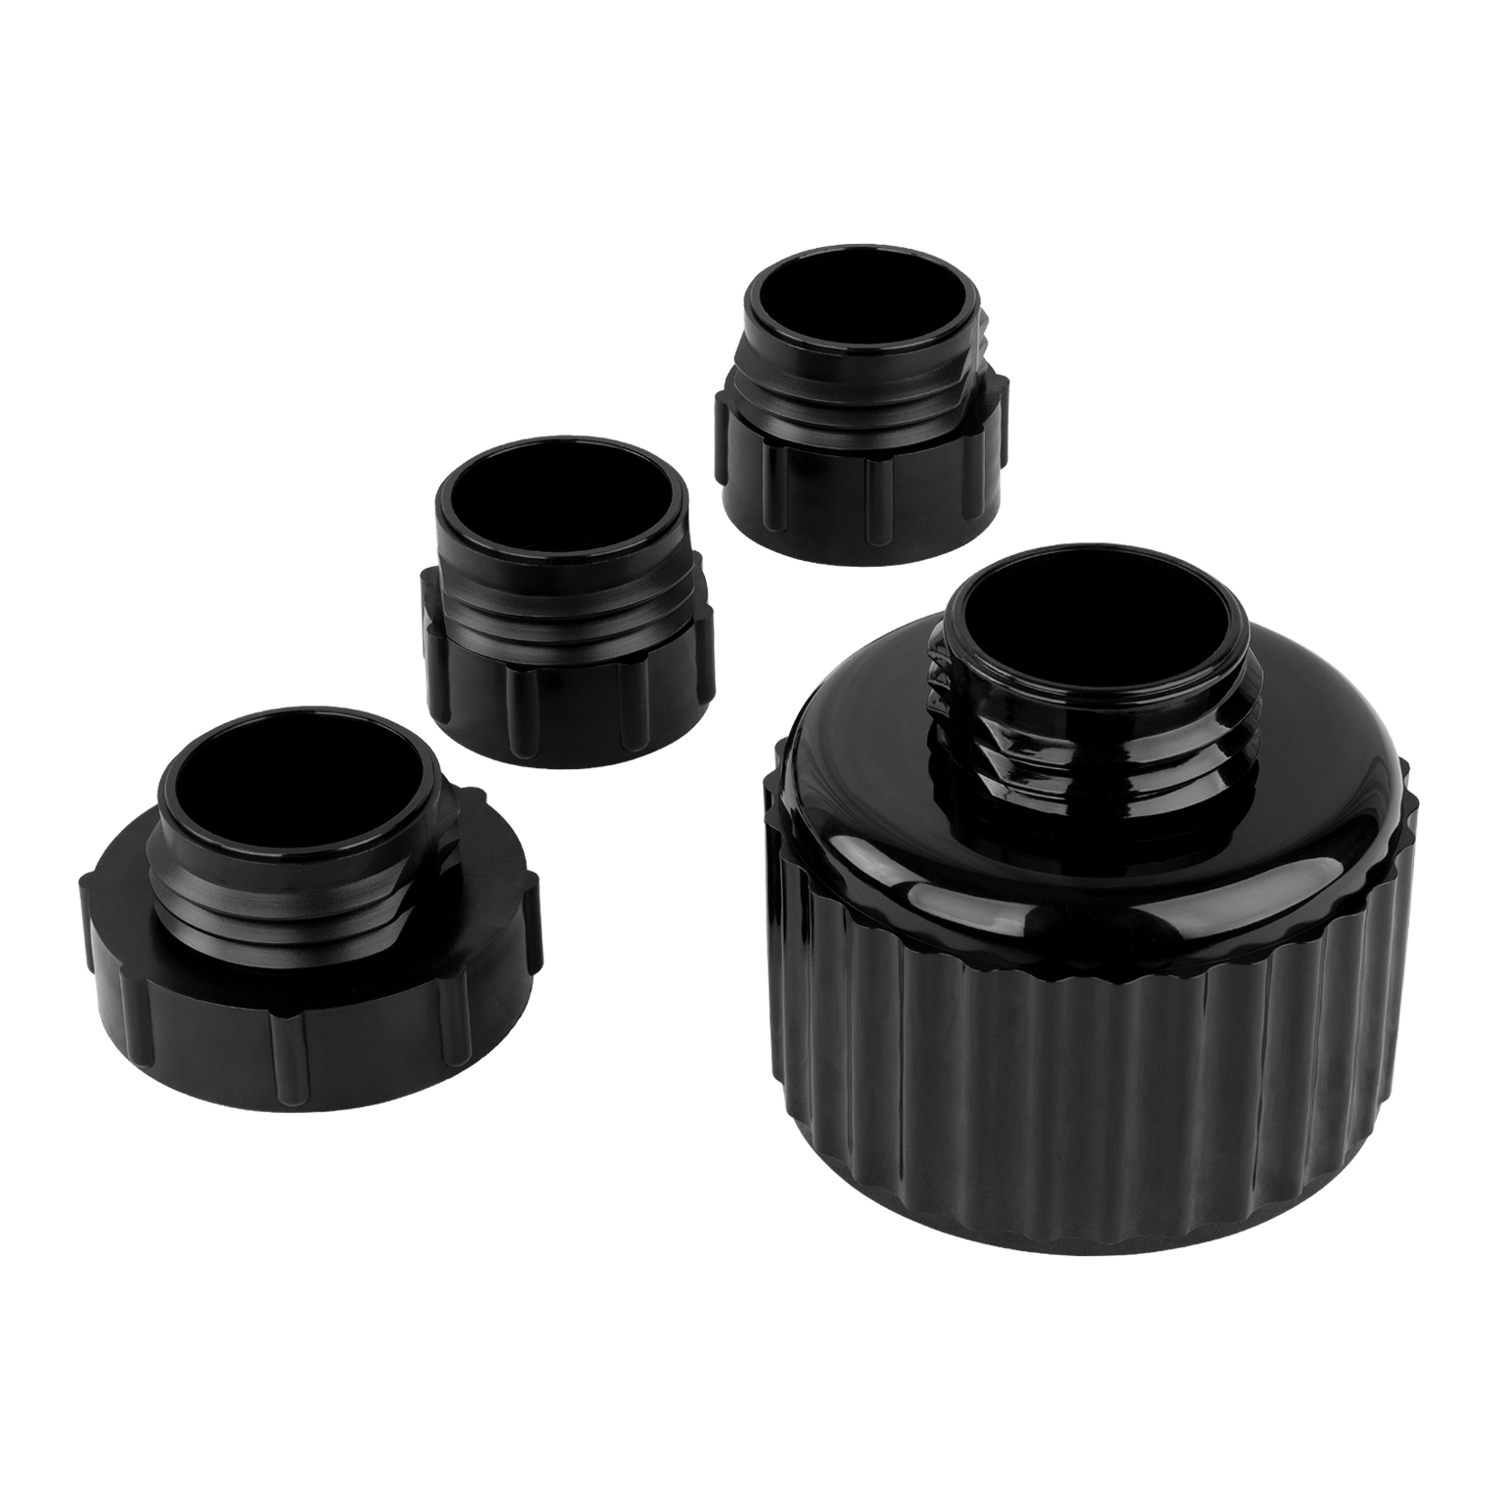 TRFA01-XL-4ADPT  Racing Gas Can Adapter & 3PK of Gas Can Adapters